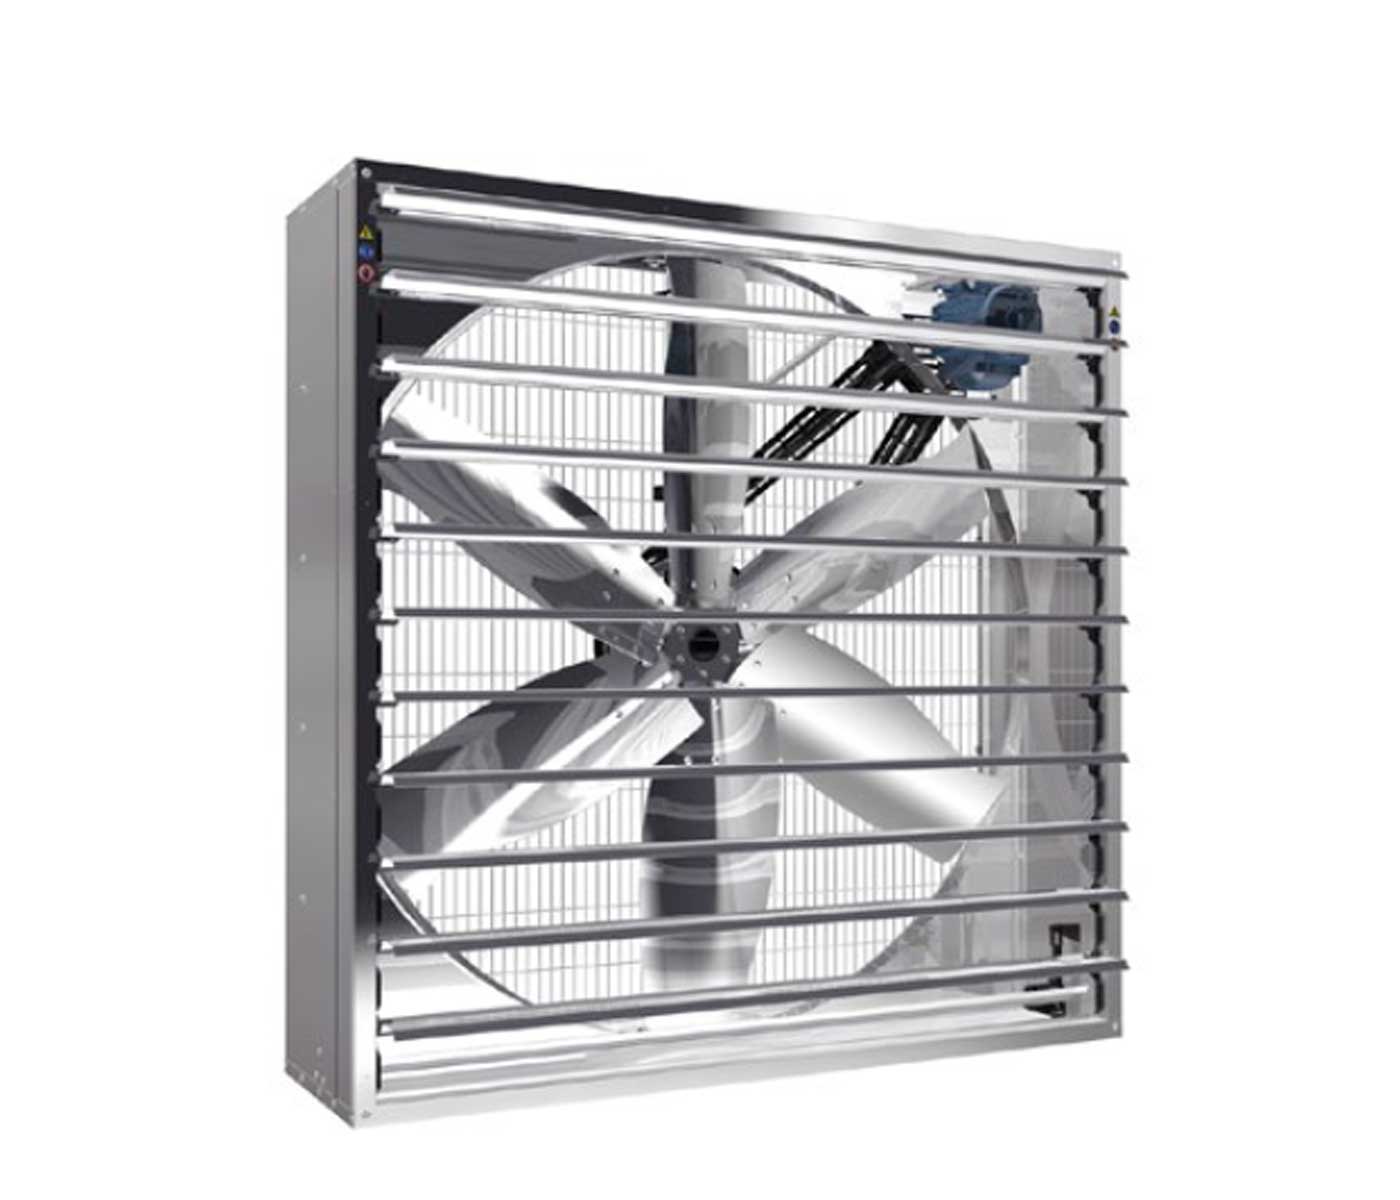 Comparison of Shutter Blade Opening Systems in Exhaust Fans: Focus on Termotecnica Pericoli  Patents